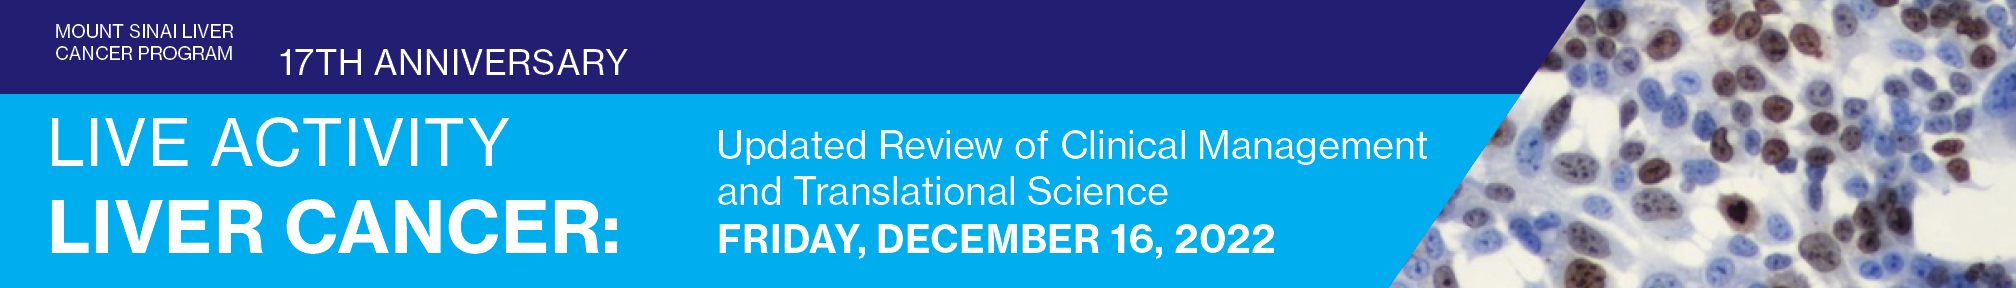 MOUNT SINAI LIVER CANCER PROGRAM. 17th ANNIVERSARY.  “LIVER CANCER: UPDATED REVIEW OF CLINICAL MANAGEMENT AND TRANSLATIONAL SCIENCE” Banner